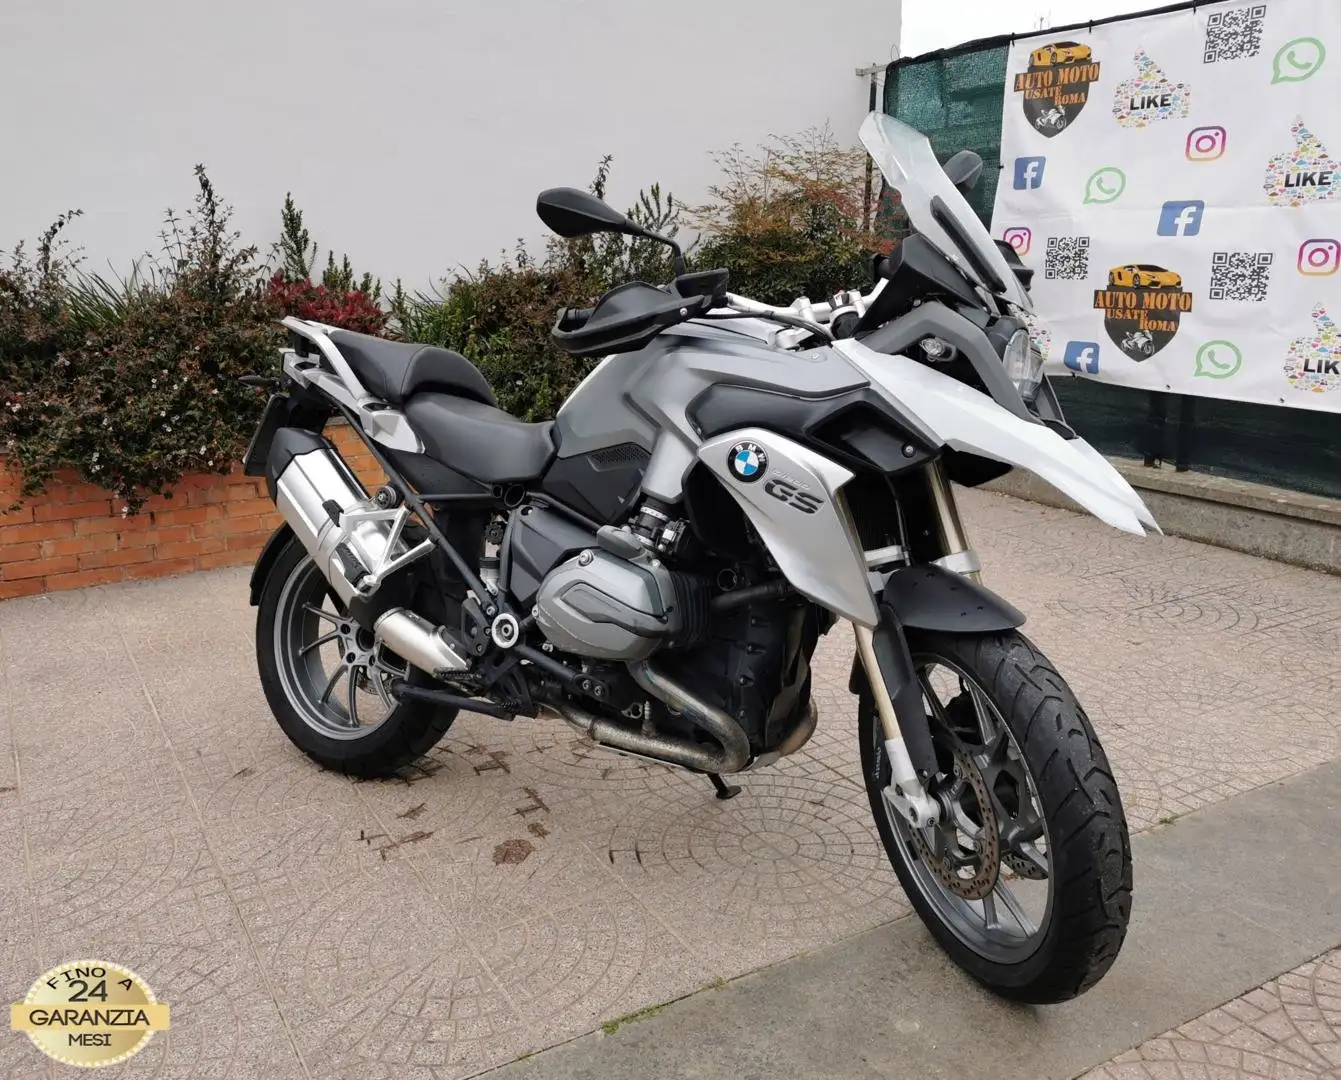 BMW R 1200 GS ABS ASC - 2016 - RATE AUTO MOTO SCOOTER Argento - 1